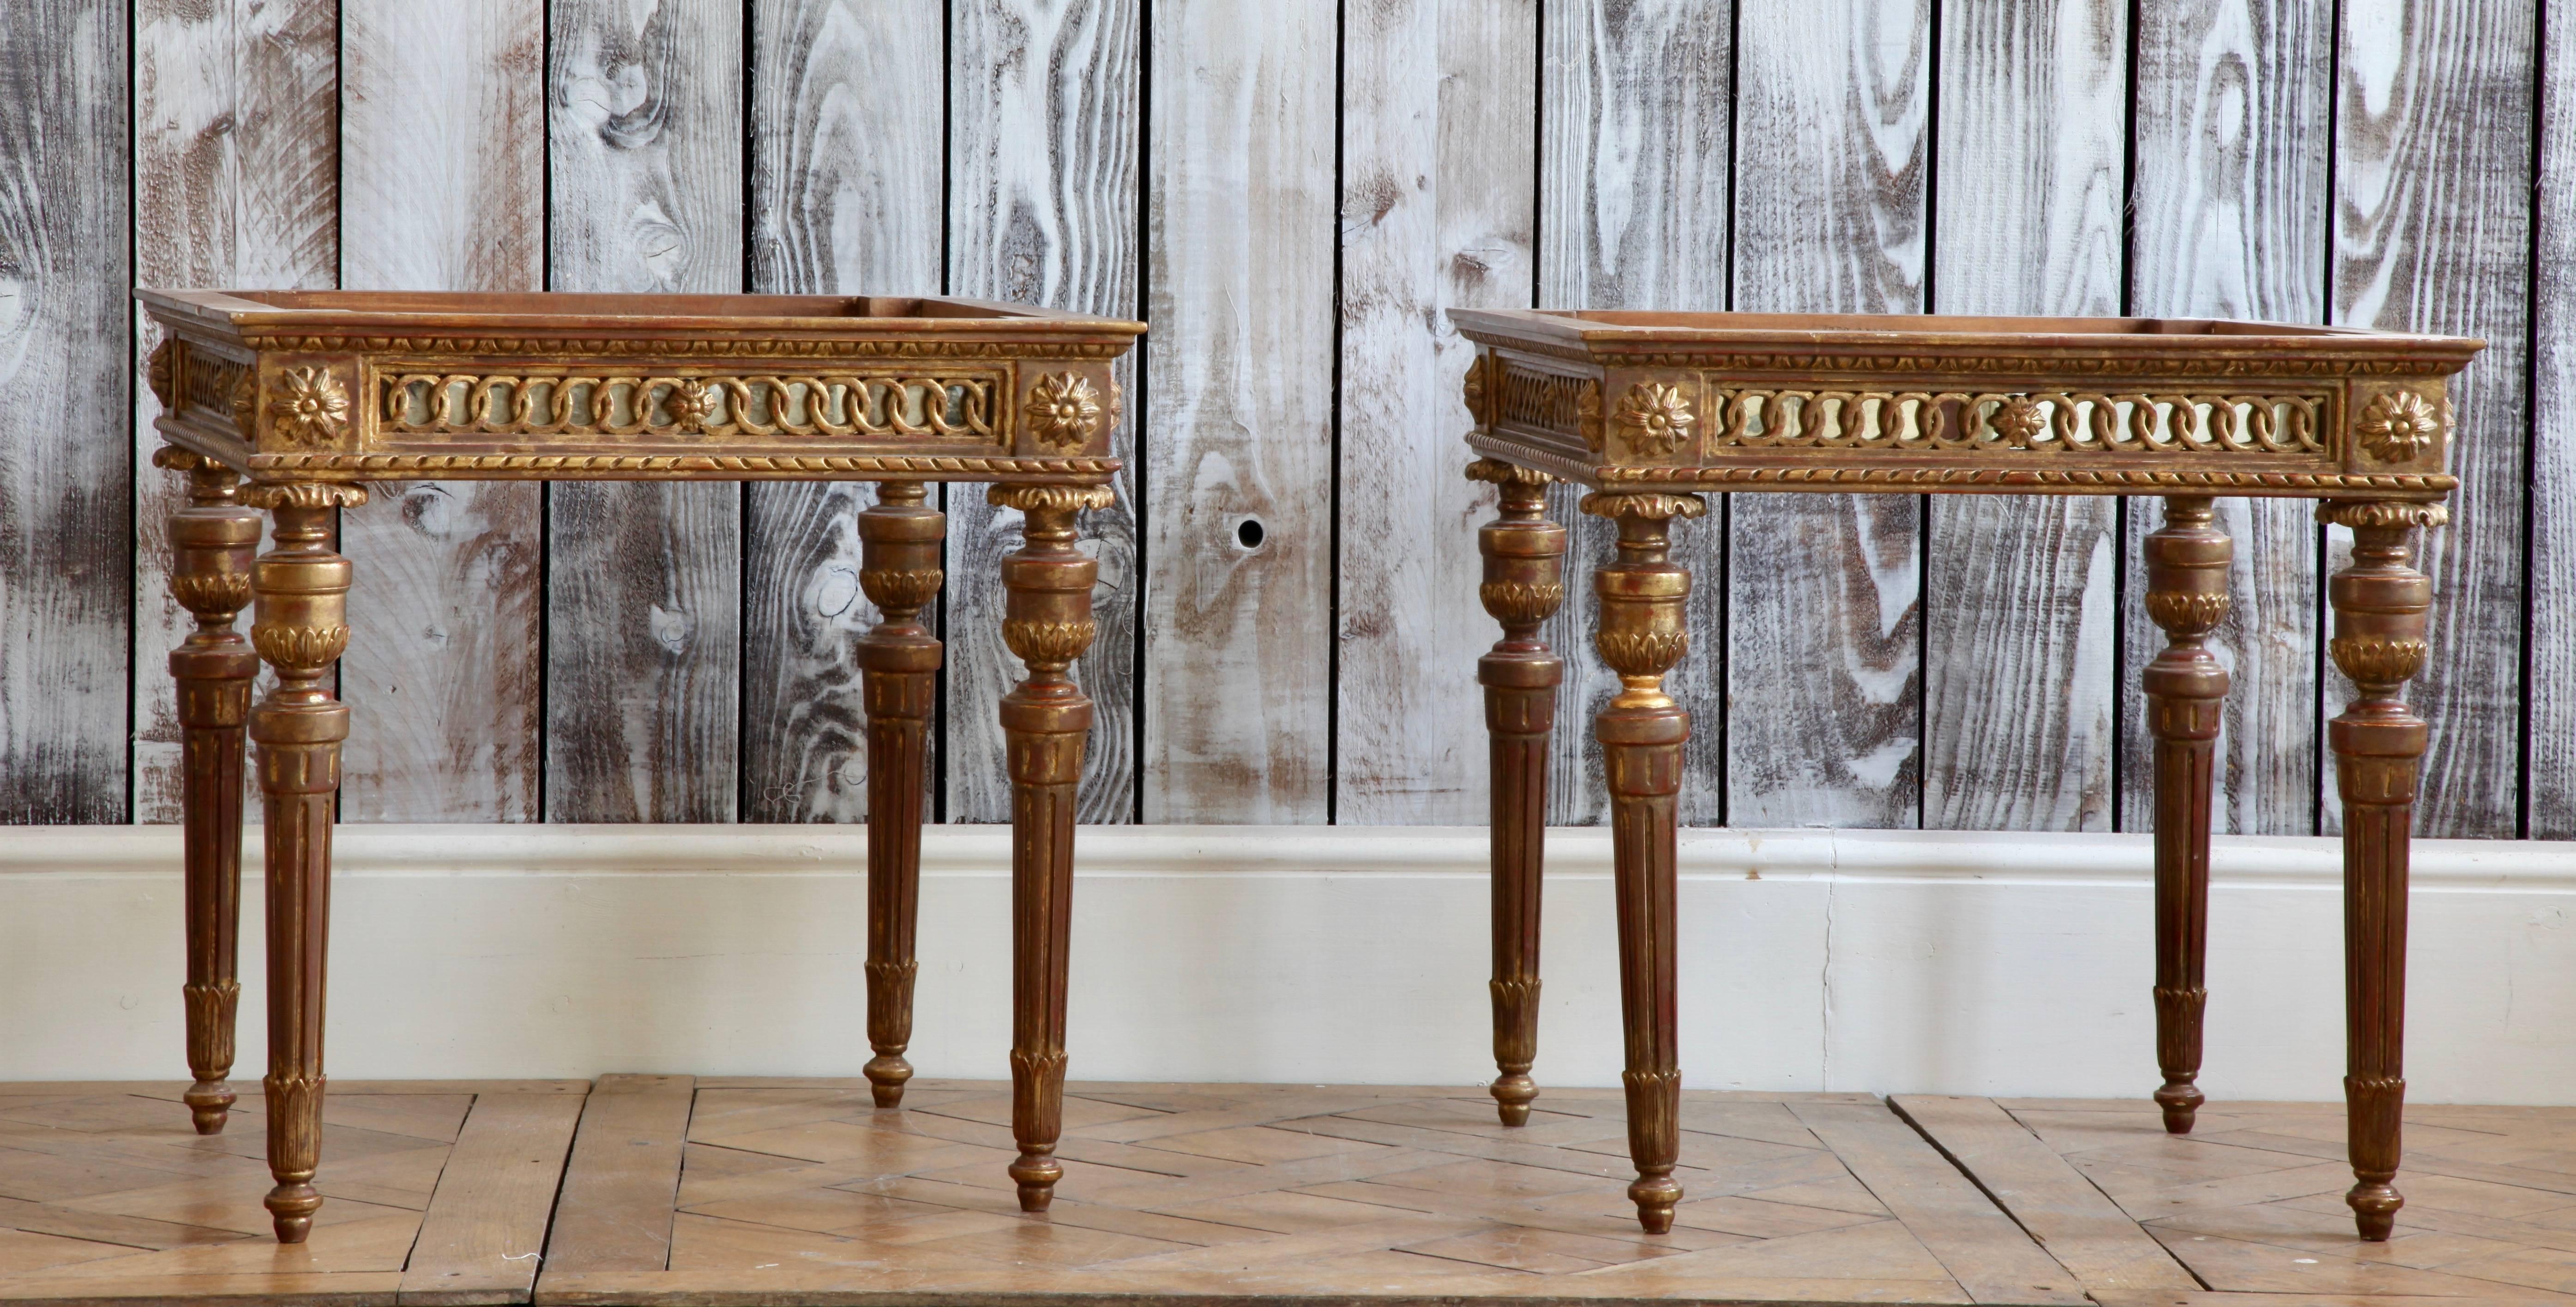 Louis XVI style giltwood coffee tables / side tables hand carved in solid wood.
Fine detailing with filigree worked backed with an antiqued mirror glass (Similar to the Venetian work found in the 18th century).
The tables have an aged gold